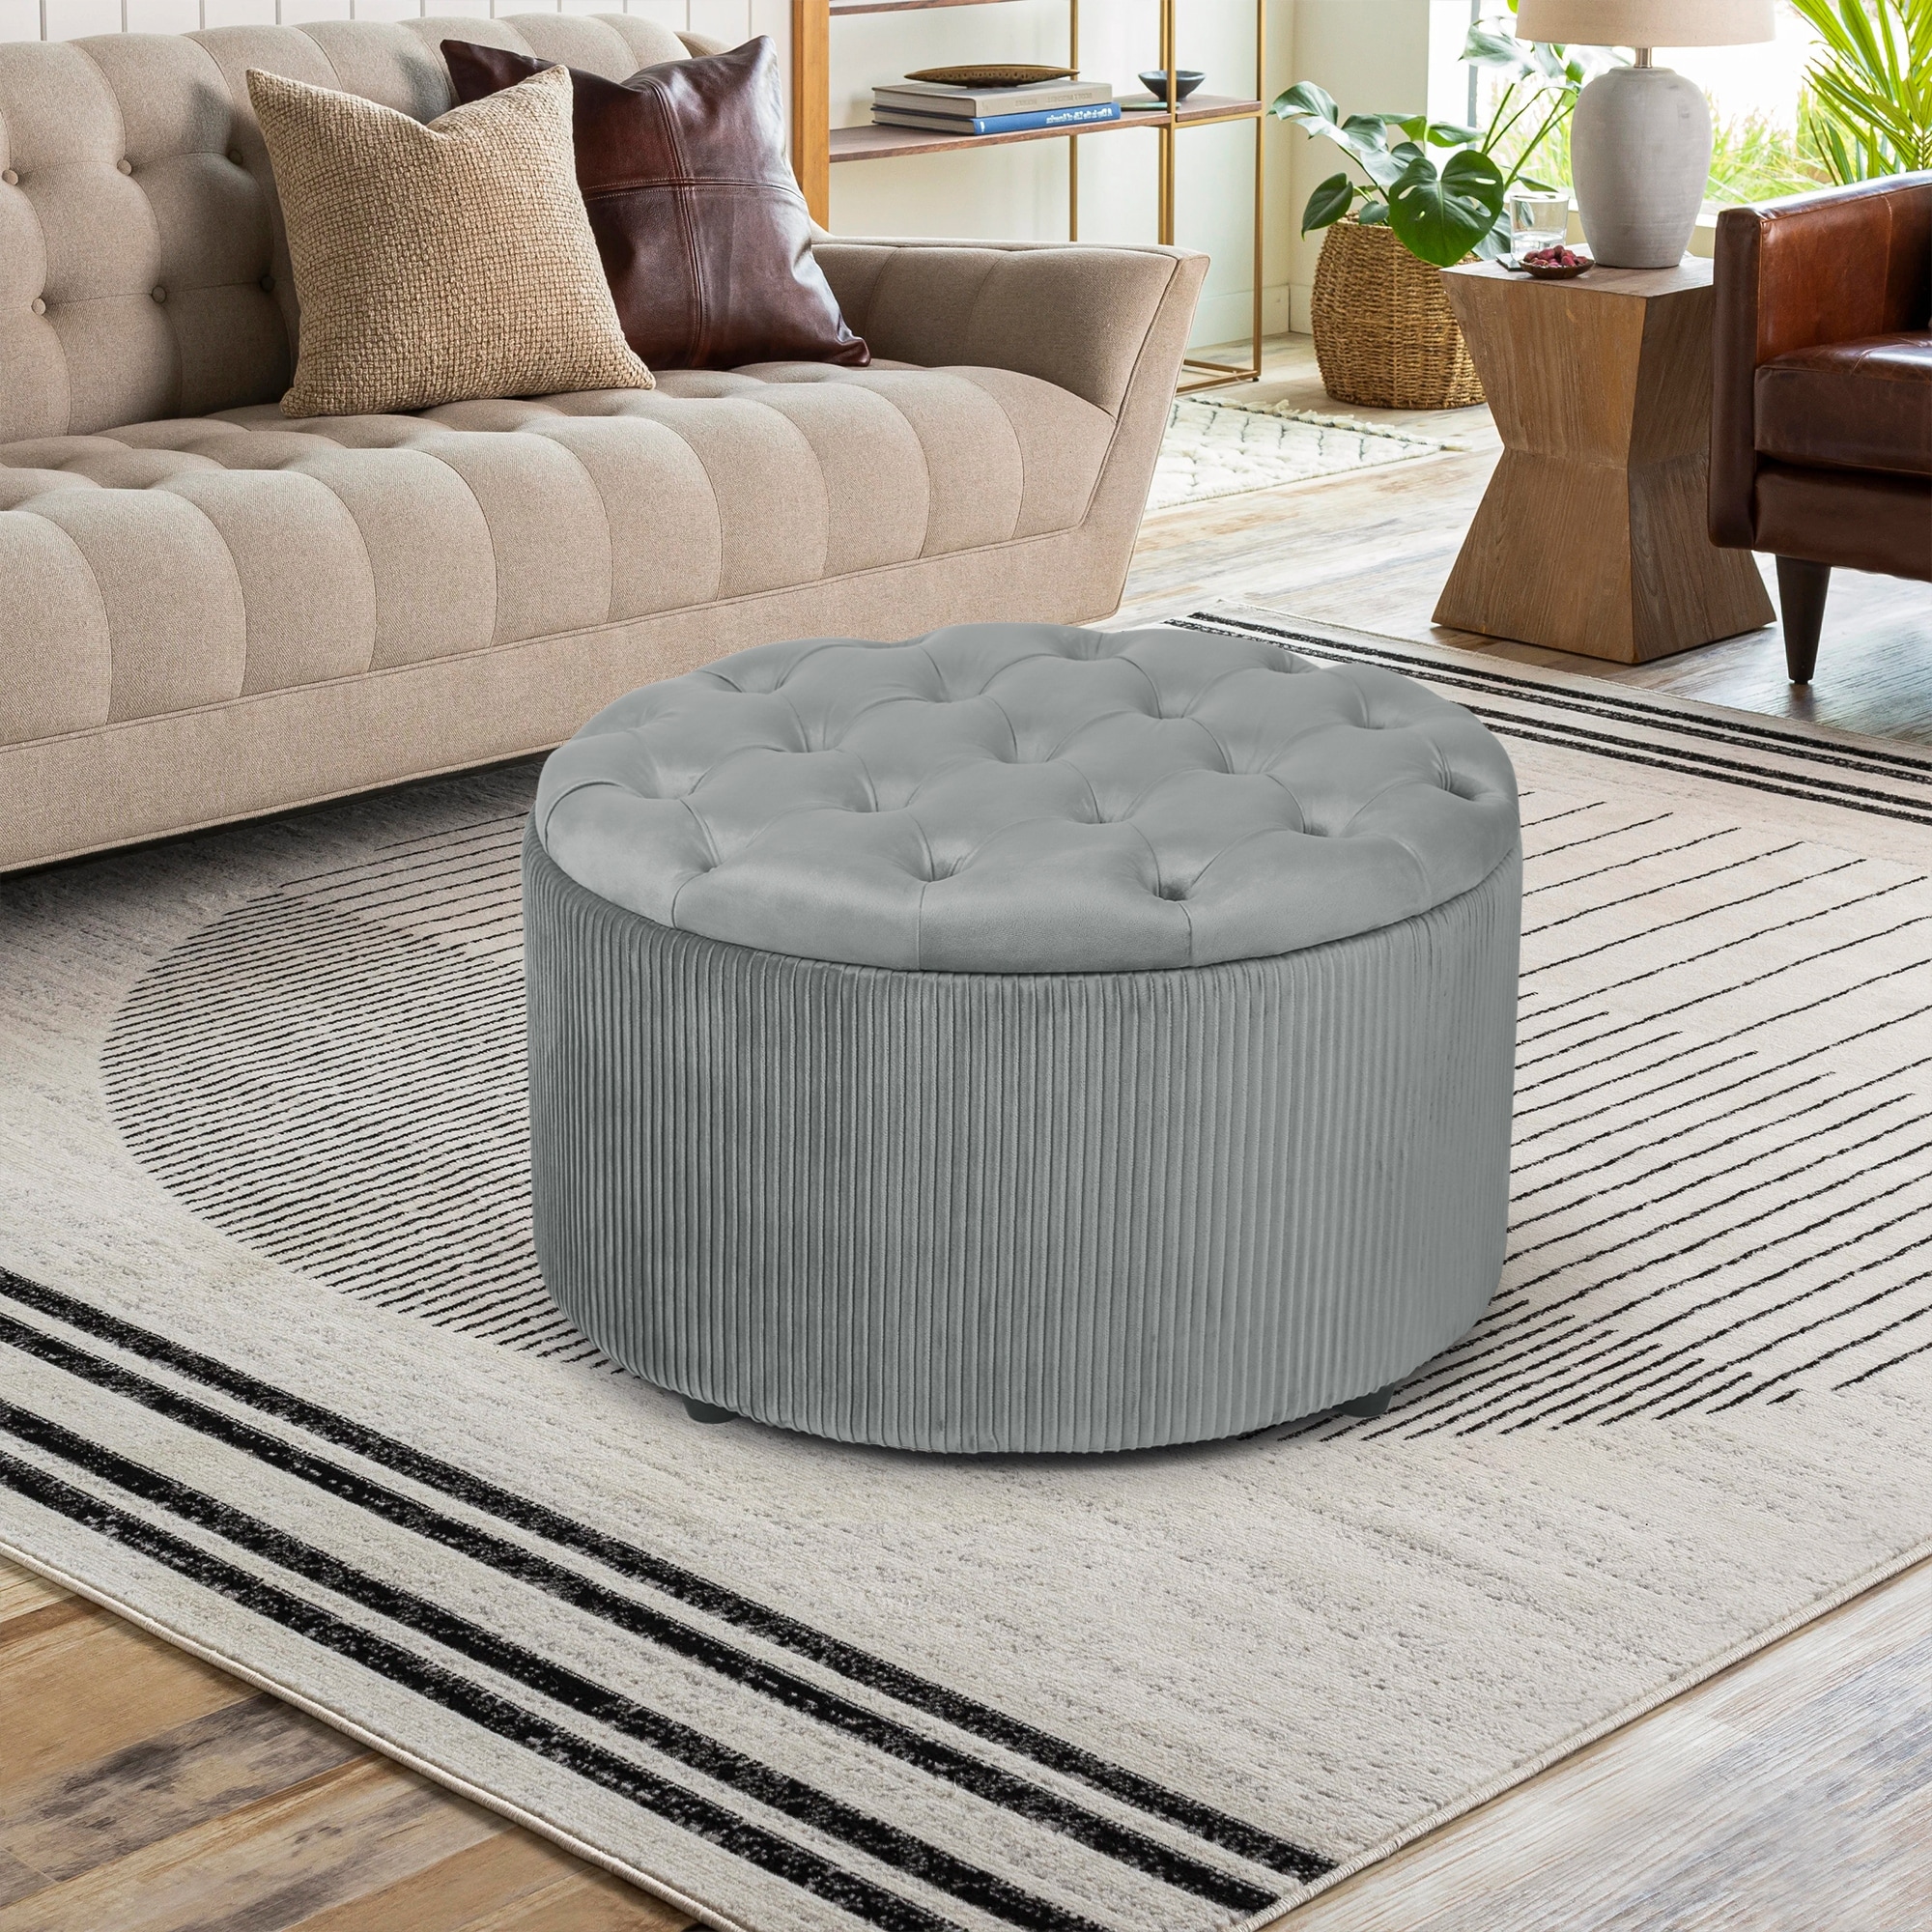 Adeco Ottoman Upholstered Fabric Footrest Pet Steps Dog Stair Stool, Footstool / Footrest - Geometric Art - Bed Bath & Beyond - 33962809